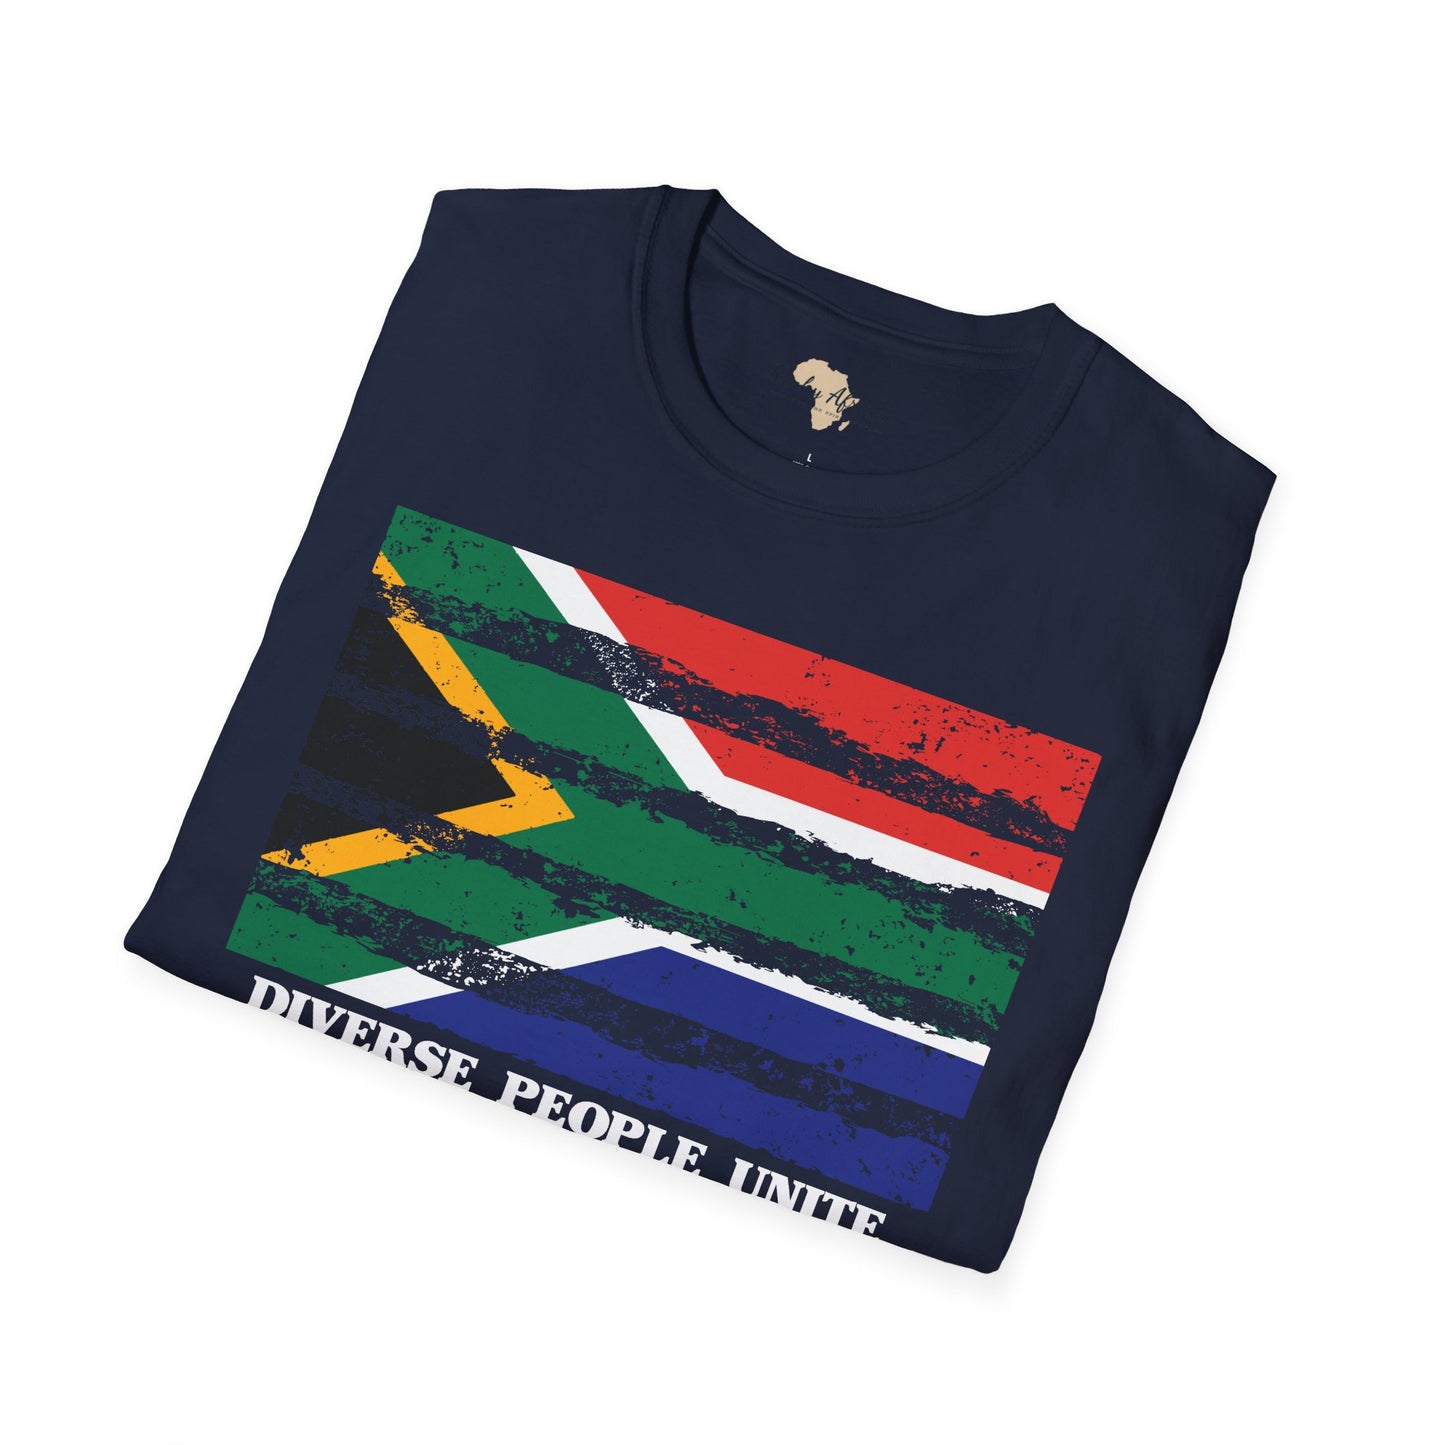 South Africa strip unisex softstyle tee